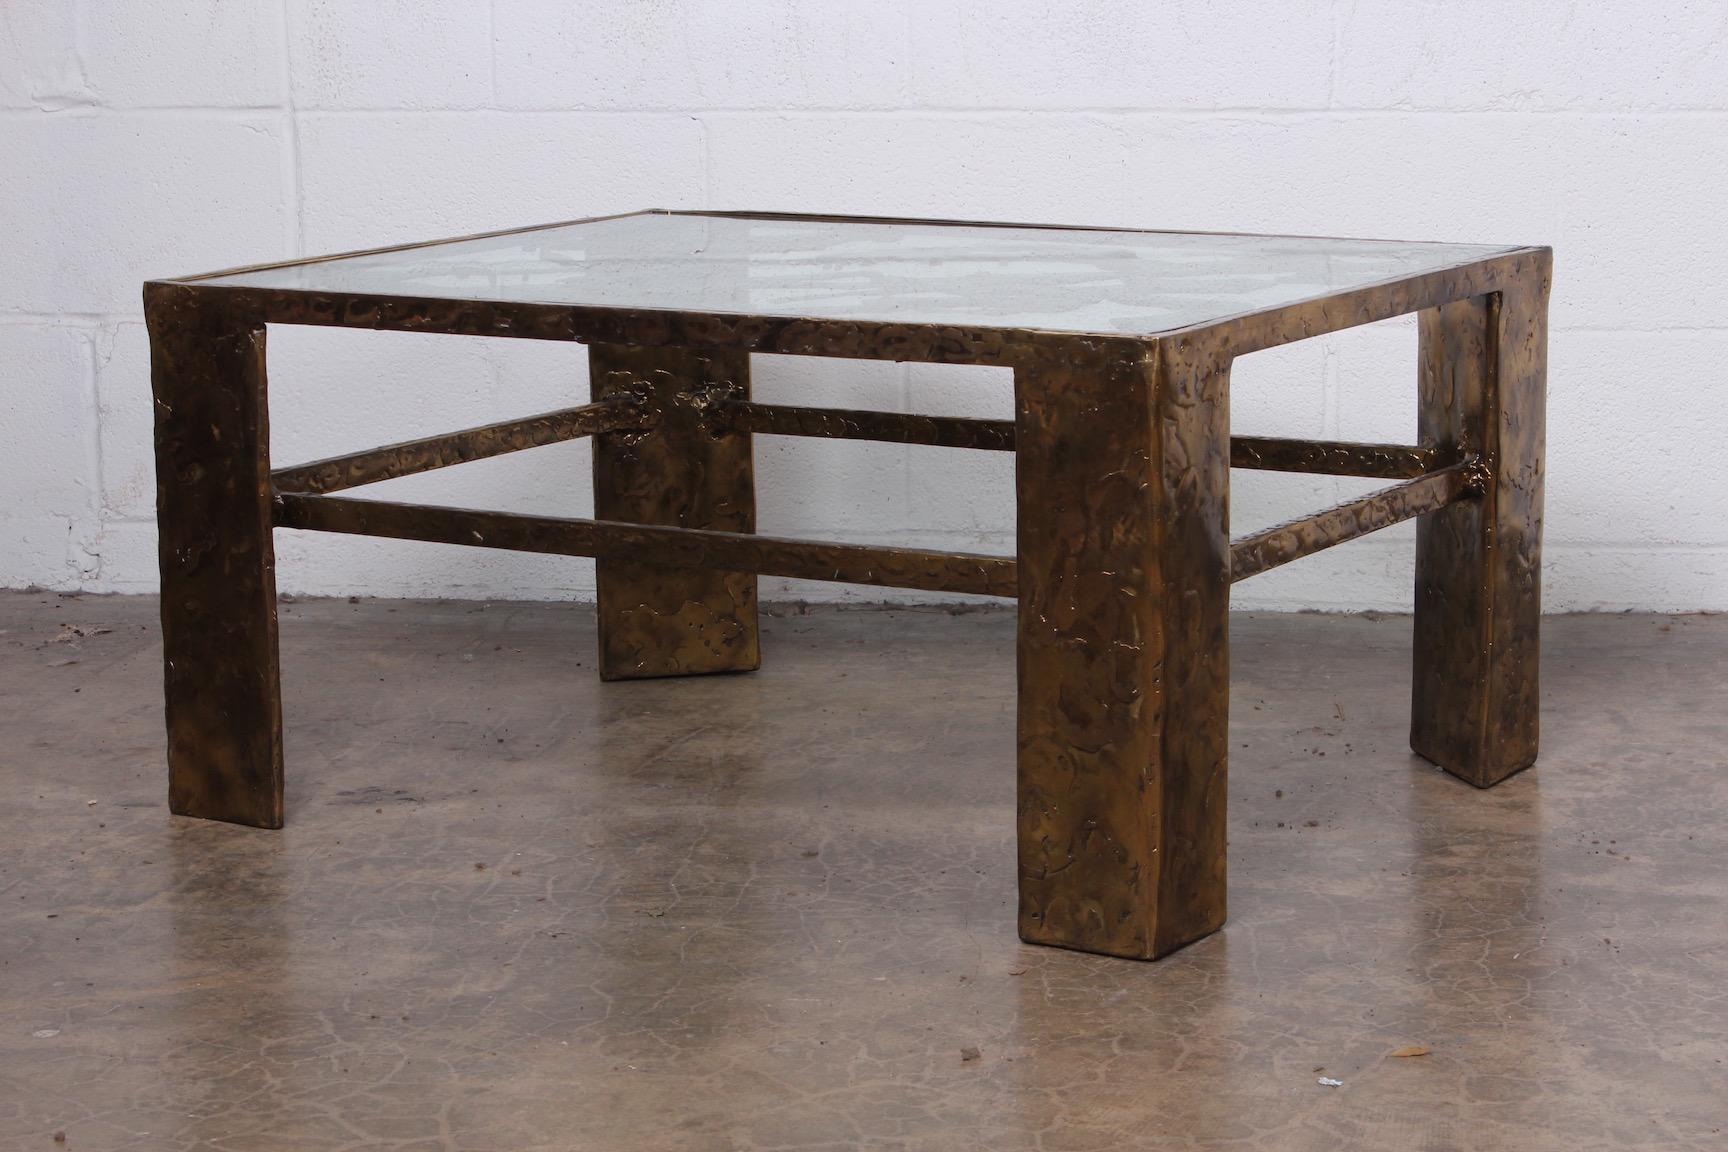 A bronze and glass table by Silas Seandel.